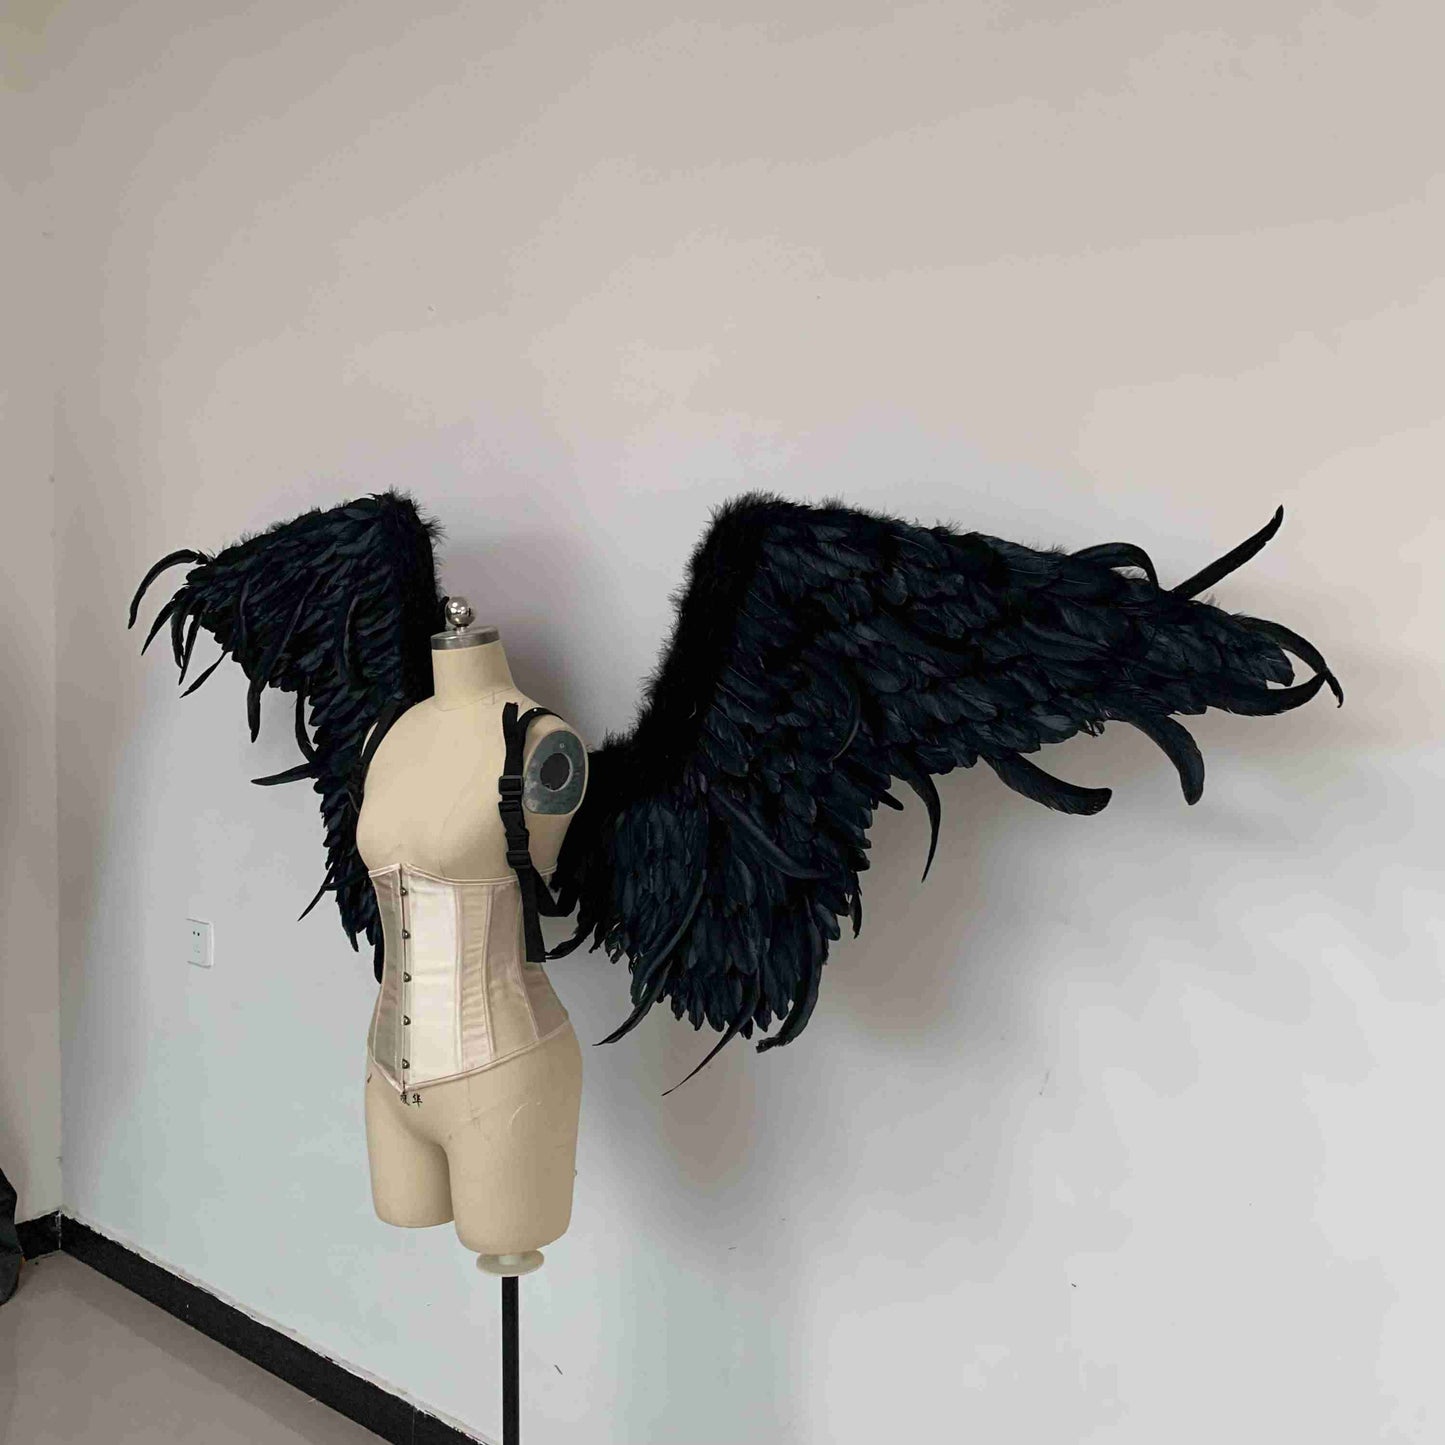 Our black color demon wings from the side. Made from goose feathers. Wings for angel costume or devil costume. Suitable for photoshoots.